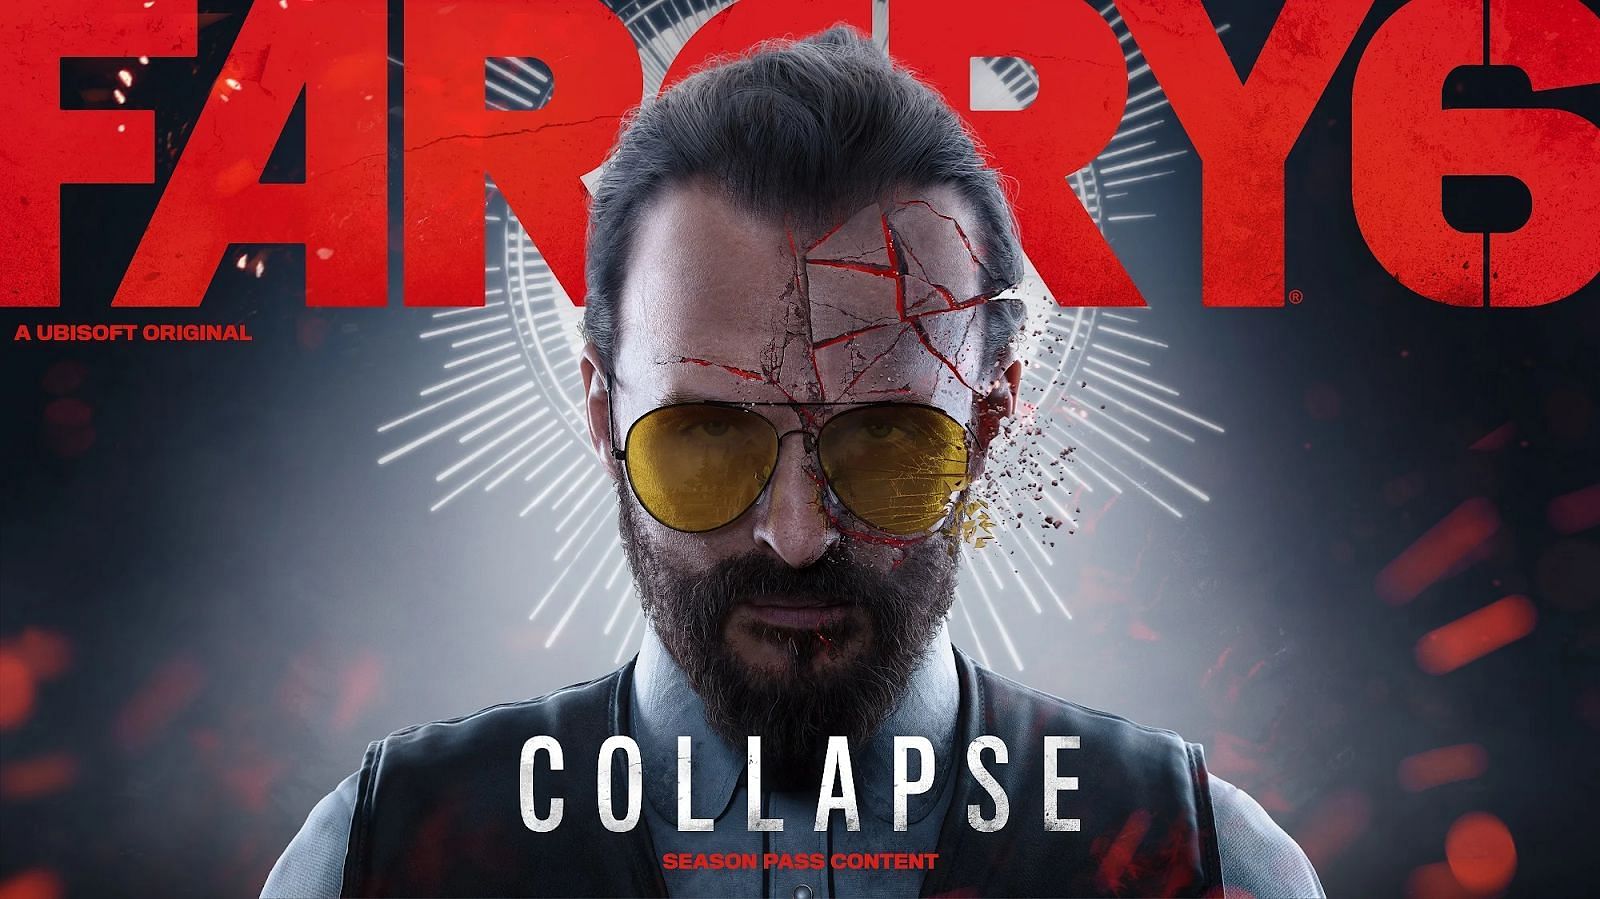 Far Cry 6 Collapse Review (Image by Ubisoft)